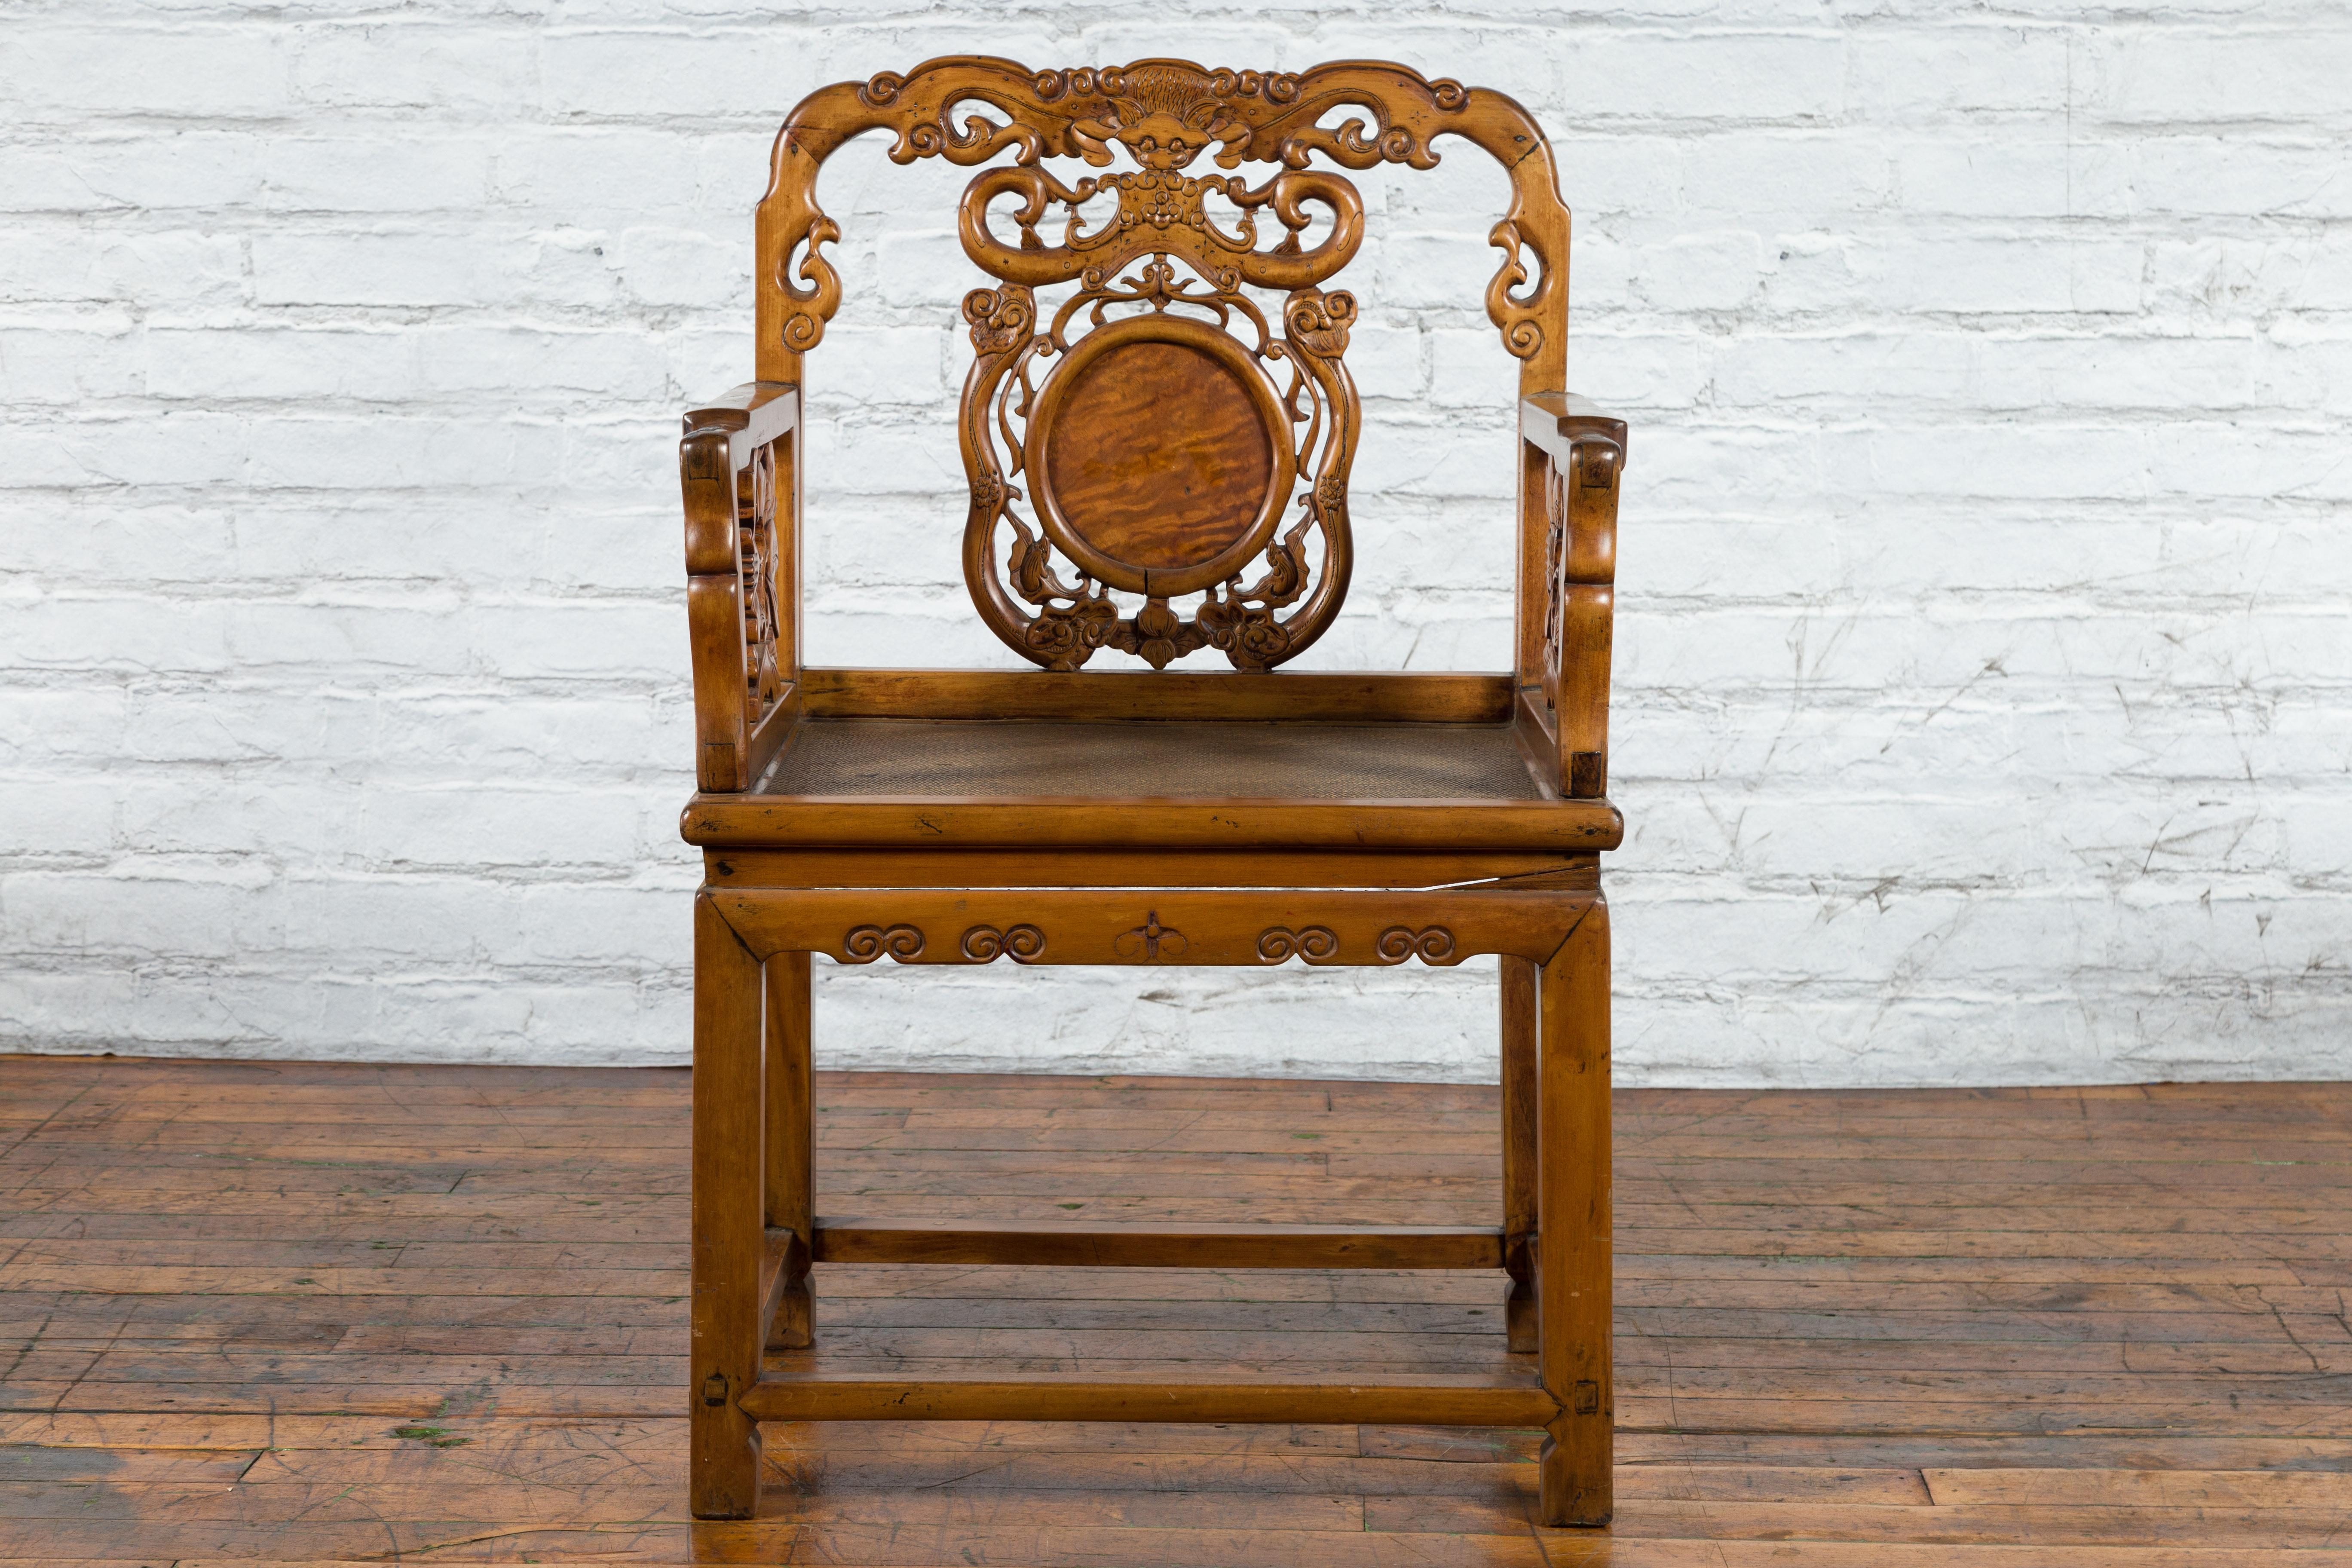 A Chinese antique wooden armchair from the early 20th century with hand-carved back and arms, and hand-woven rattan seat. Created in China during the early years of the 20th century, this unusual wooden chair features a mesmerizing back adorned with